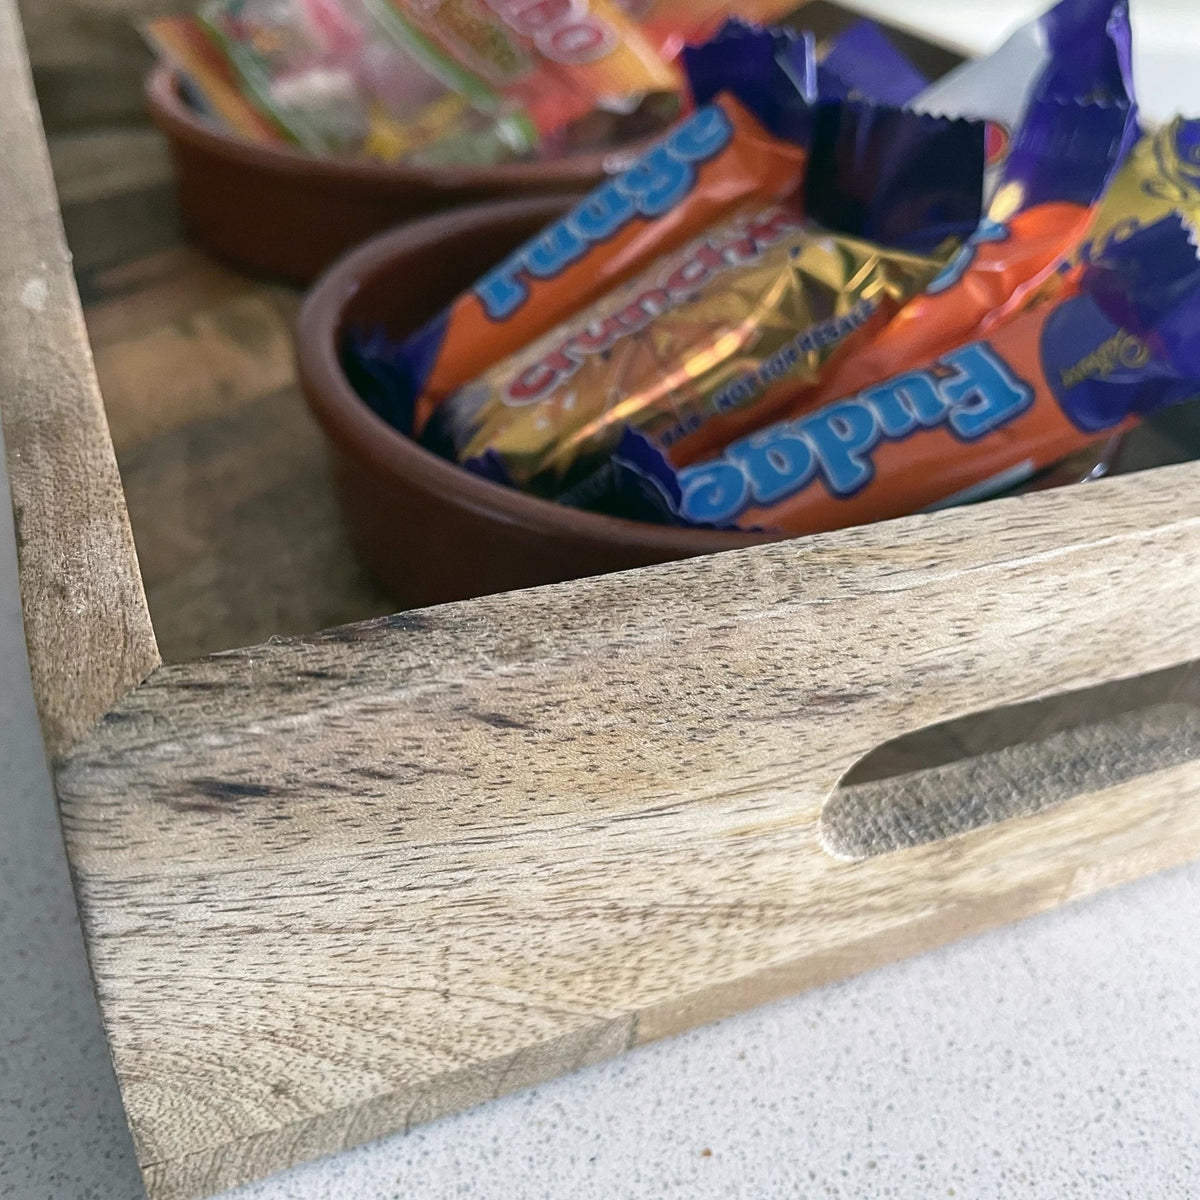 Rectangular Herringbone Wooden Serving Trays close up with sweets in